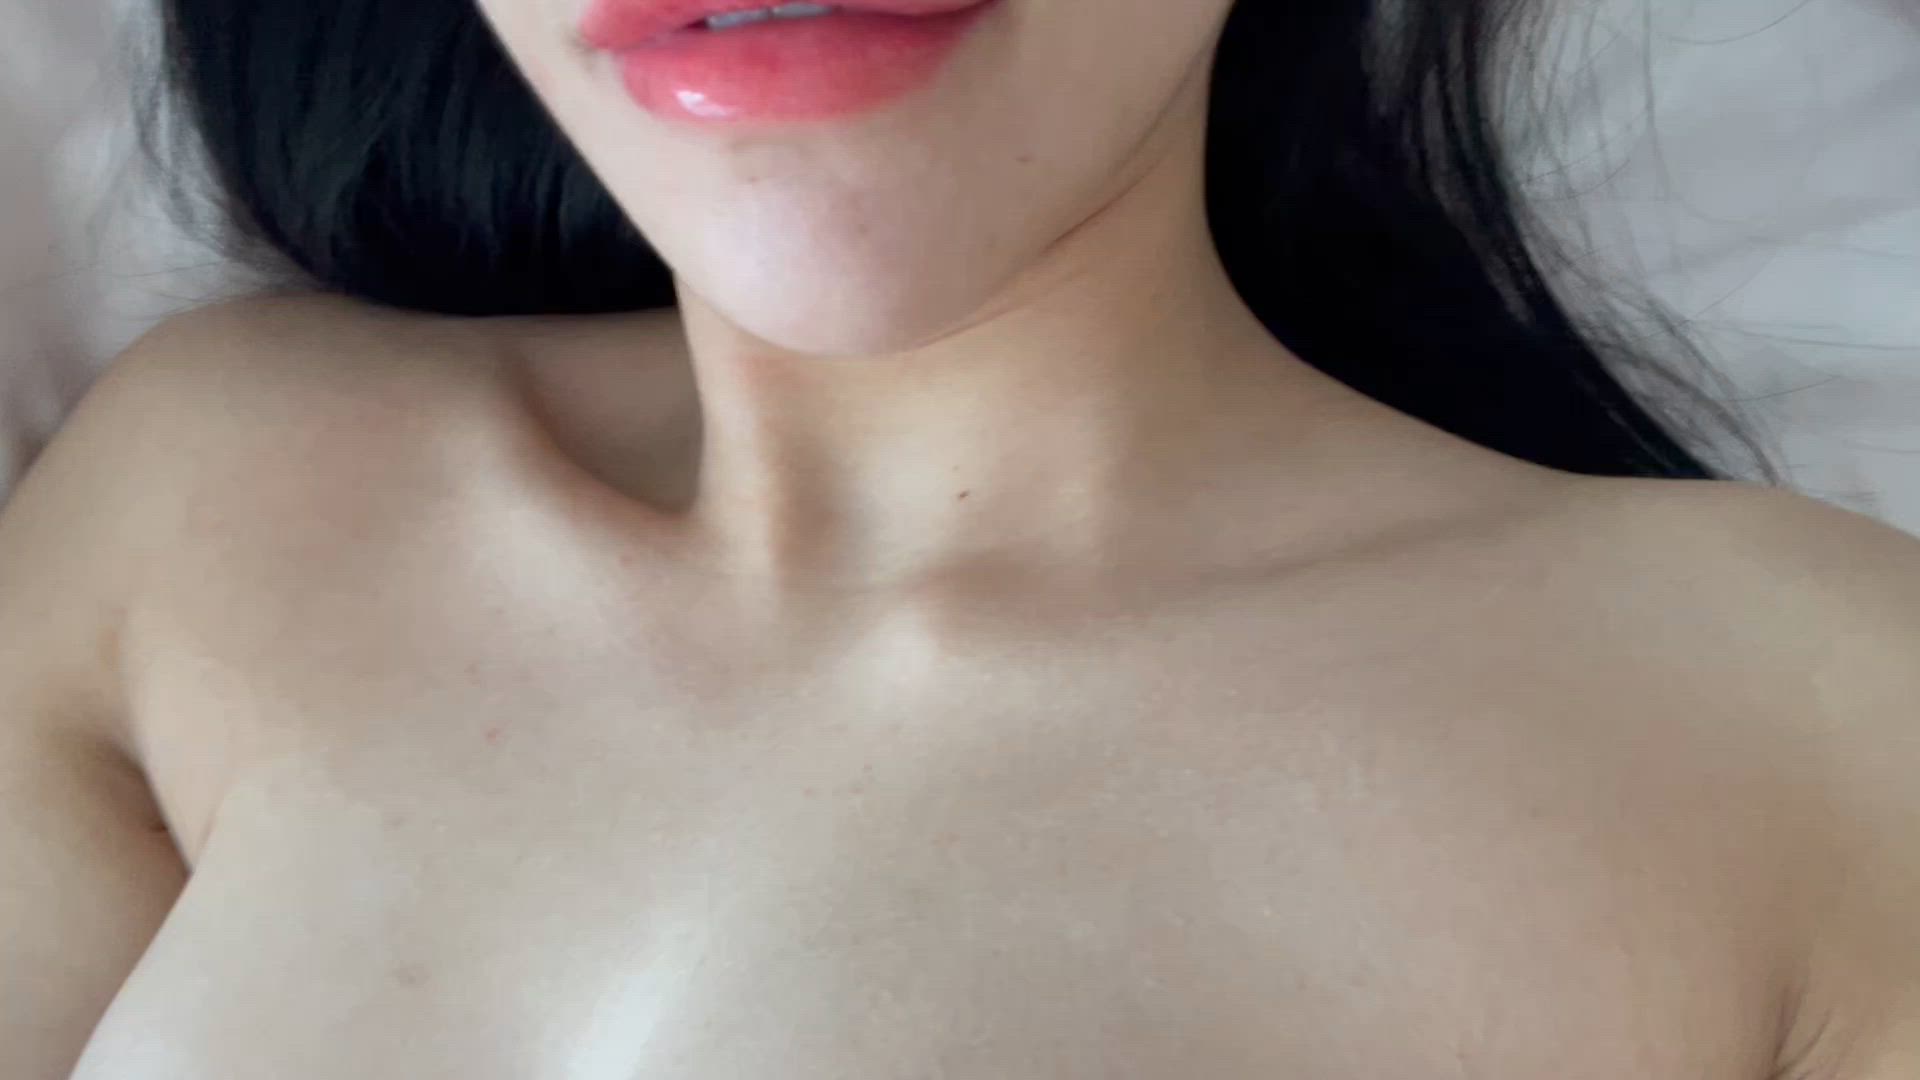 Amateur porn video with onlyfans model yvonnca <strong>@yvnnca</strong>